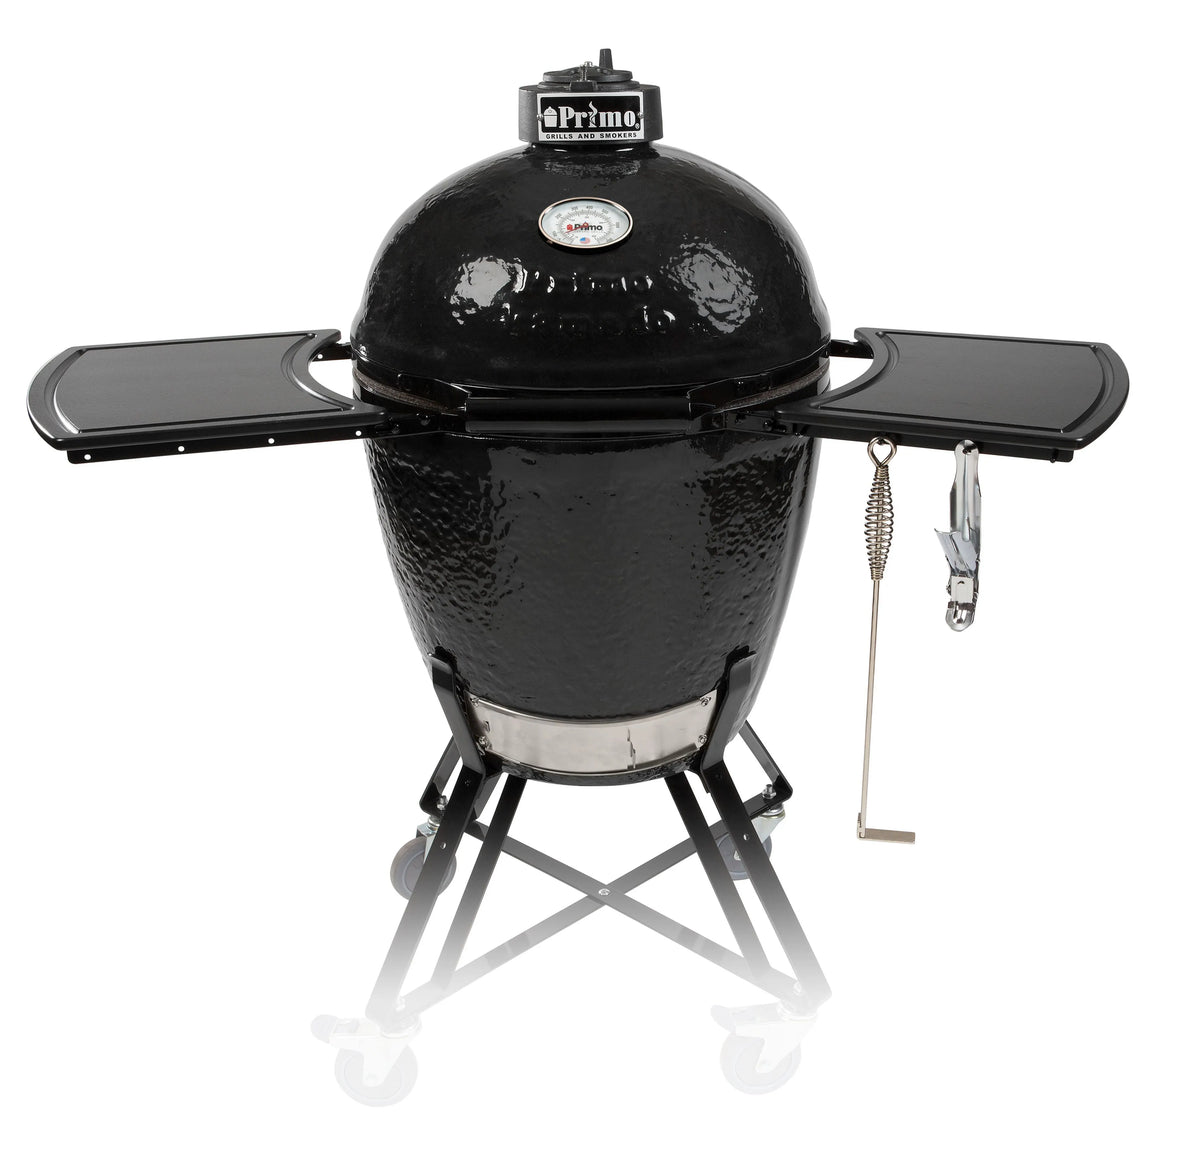 Primo All-in-One Round 21 1/2 Inch Ceramic Kamado Charcoal Grill With Accessories